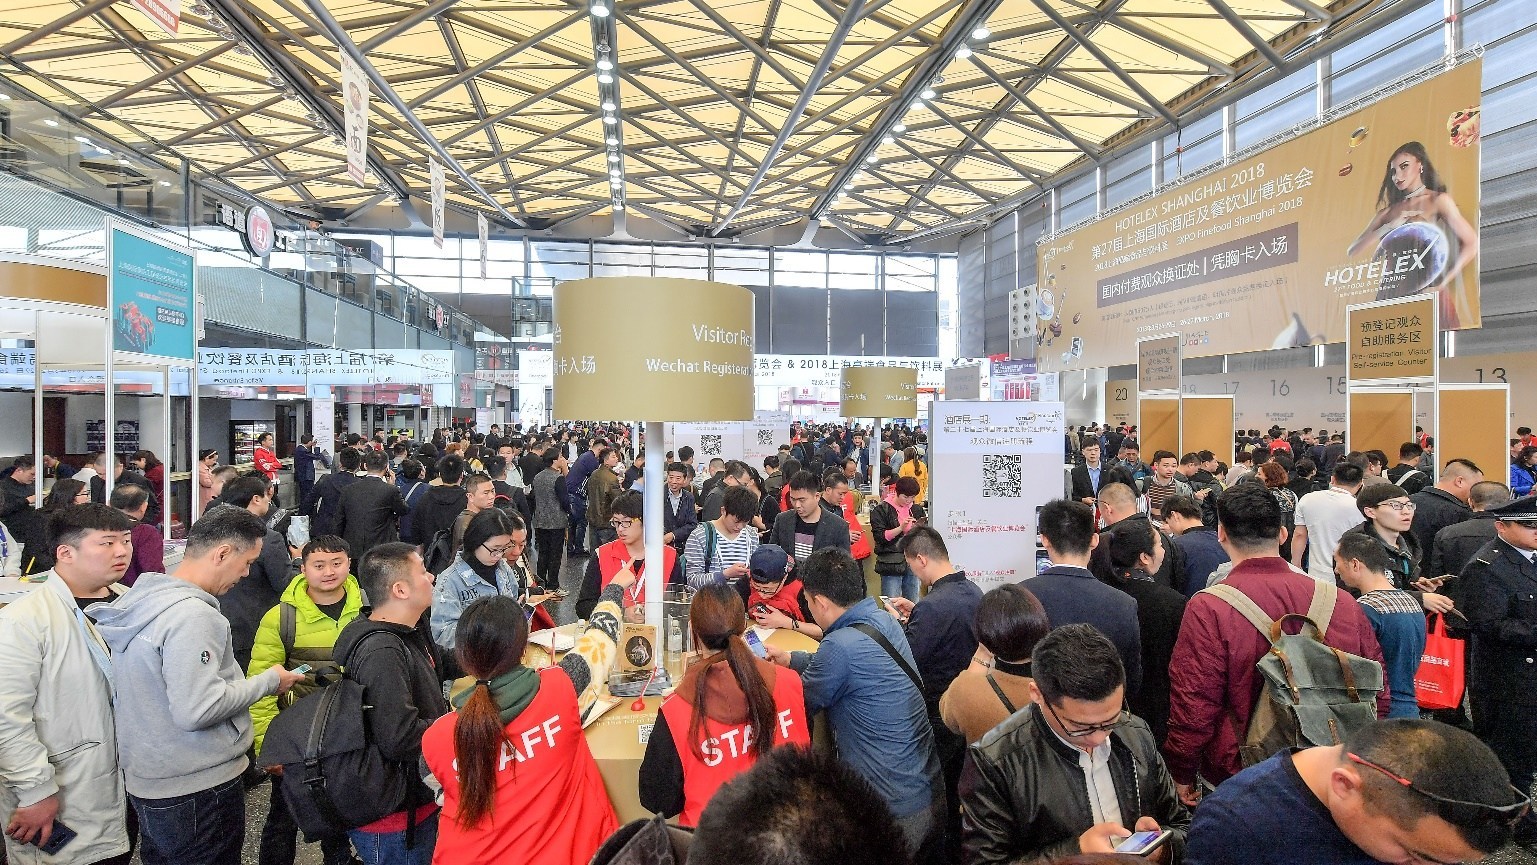 HOTELEX Shanghai 2019 will be held on 1-4 April, 2019